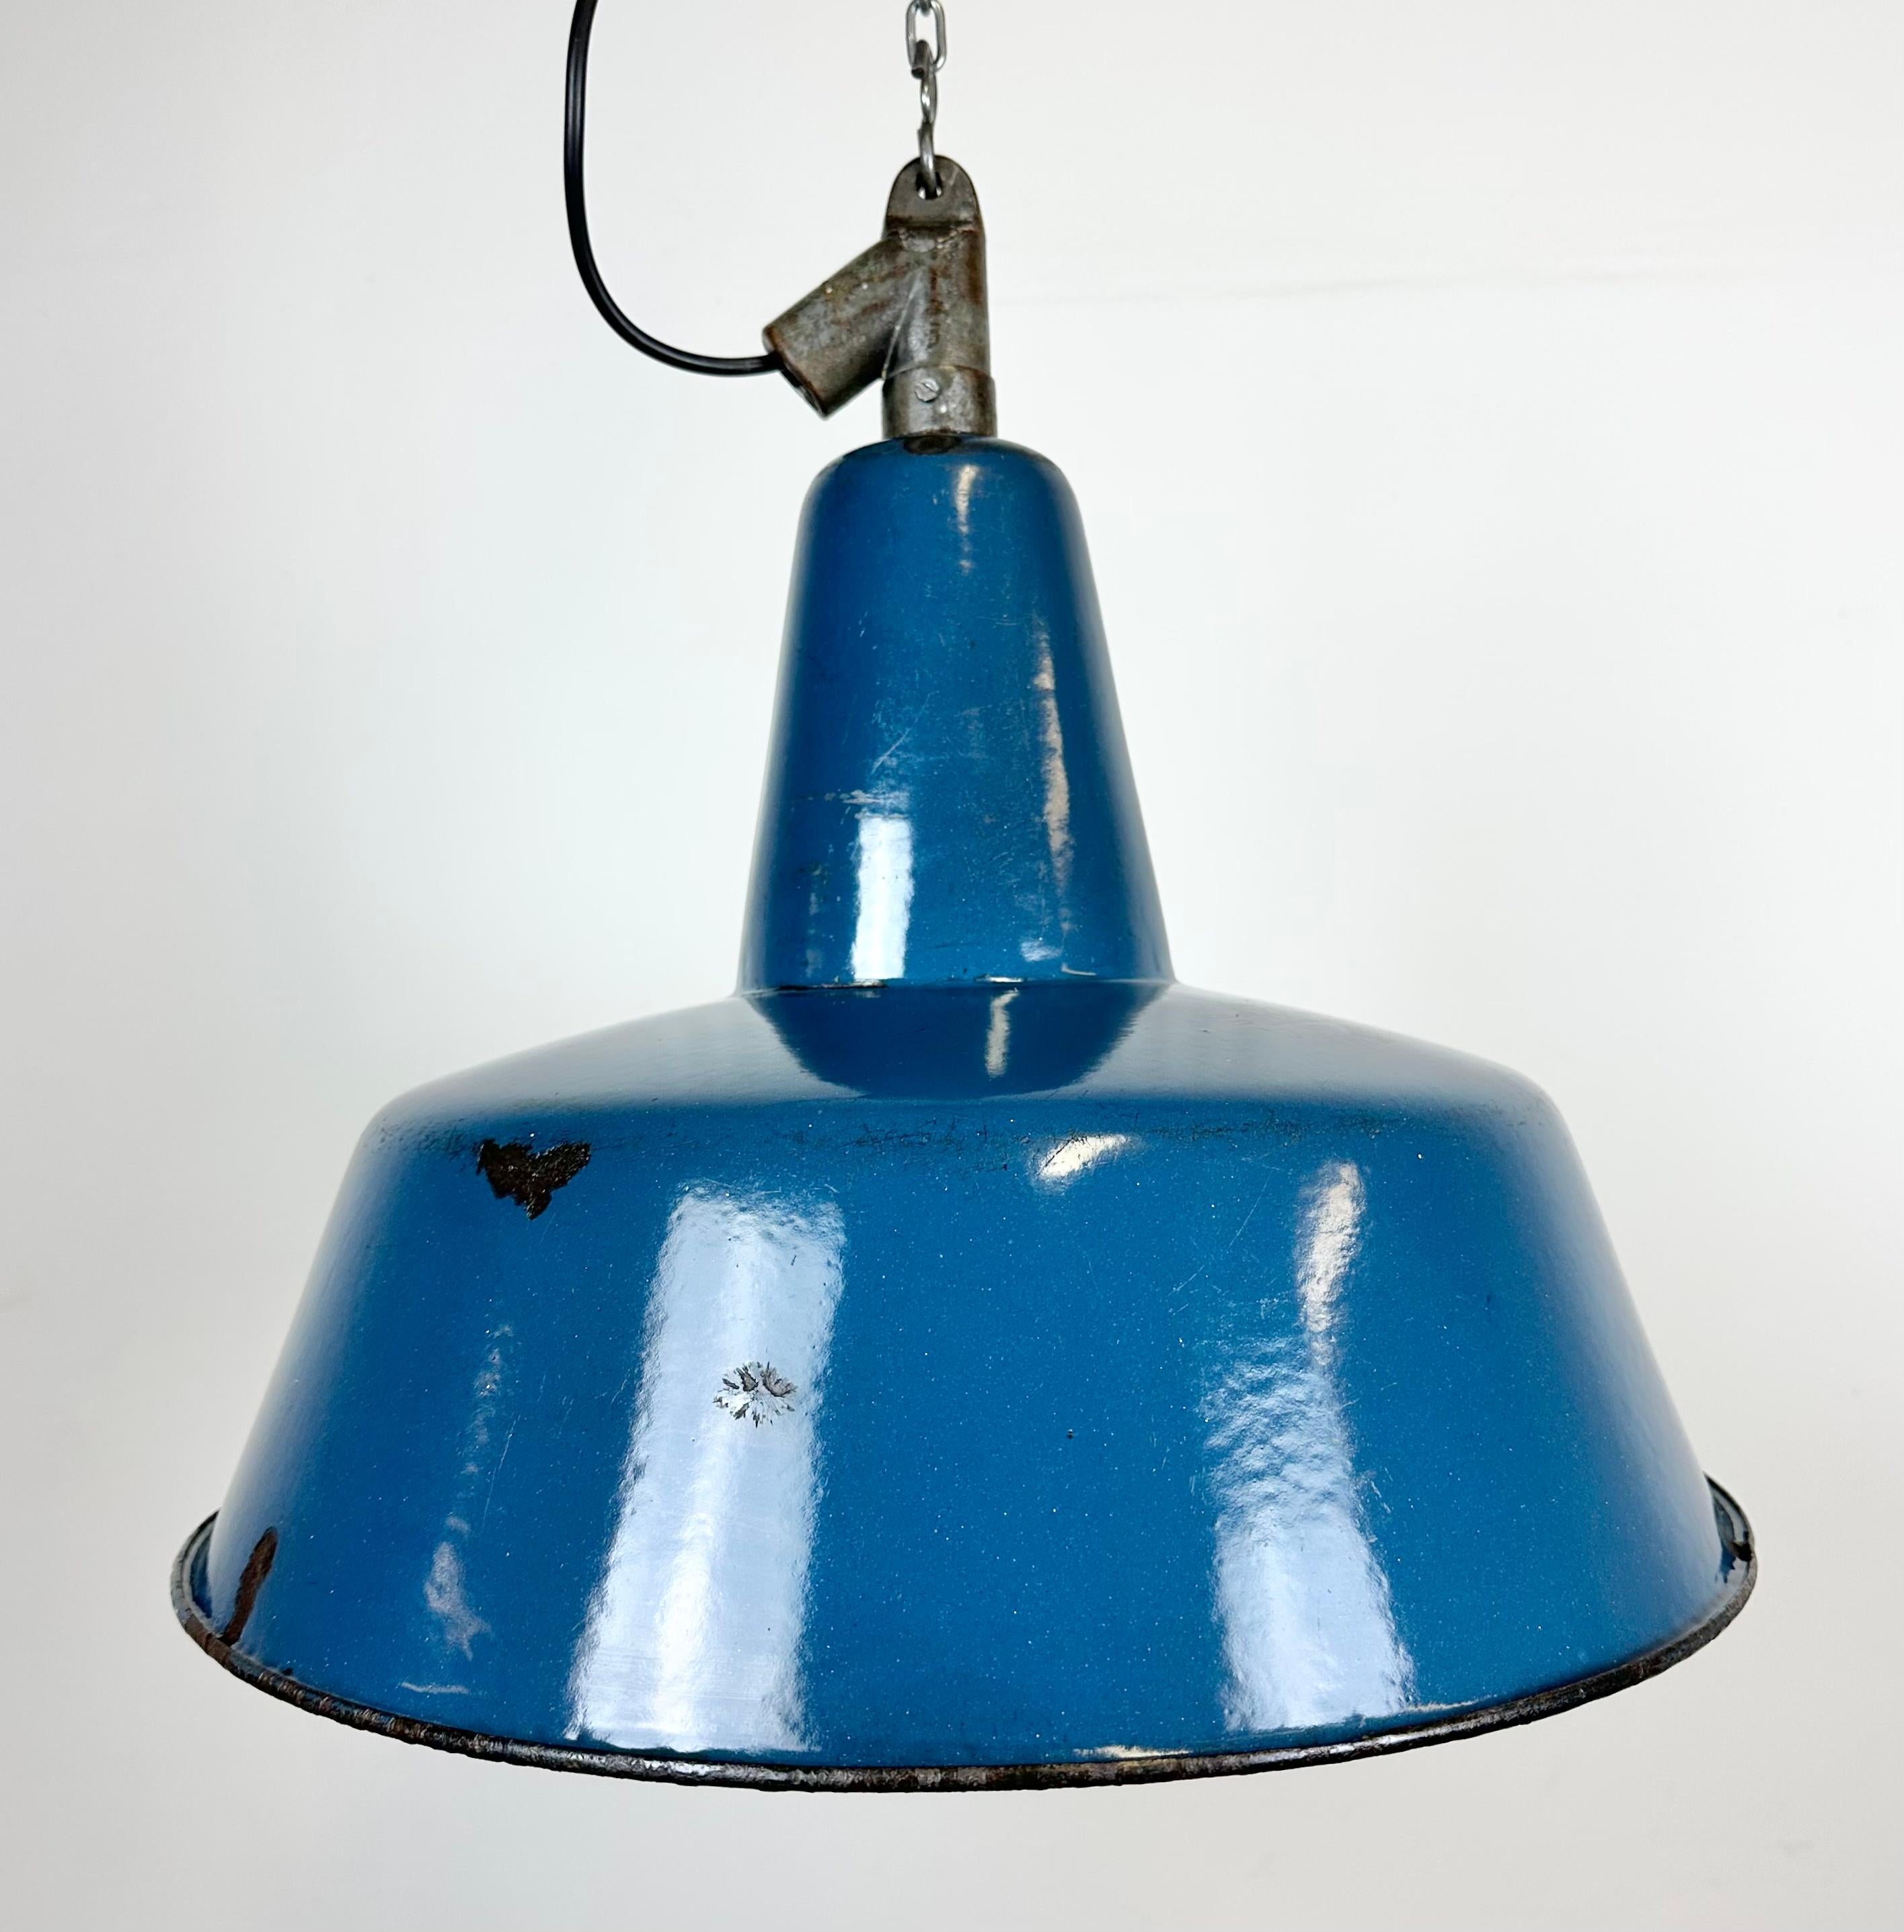 Polish Industrial Blue Enamel Factory Lamp with Cast Iron Top, 1960s For Sale